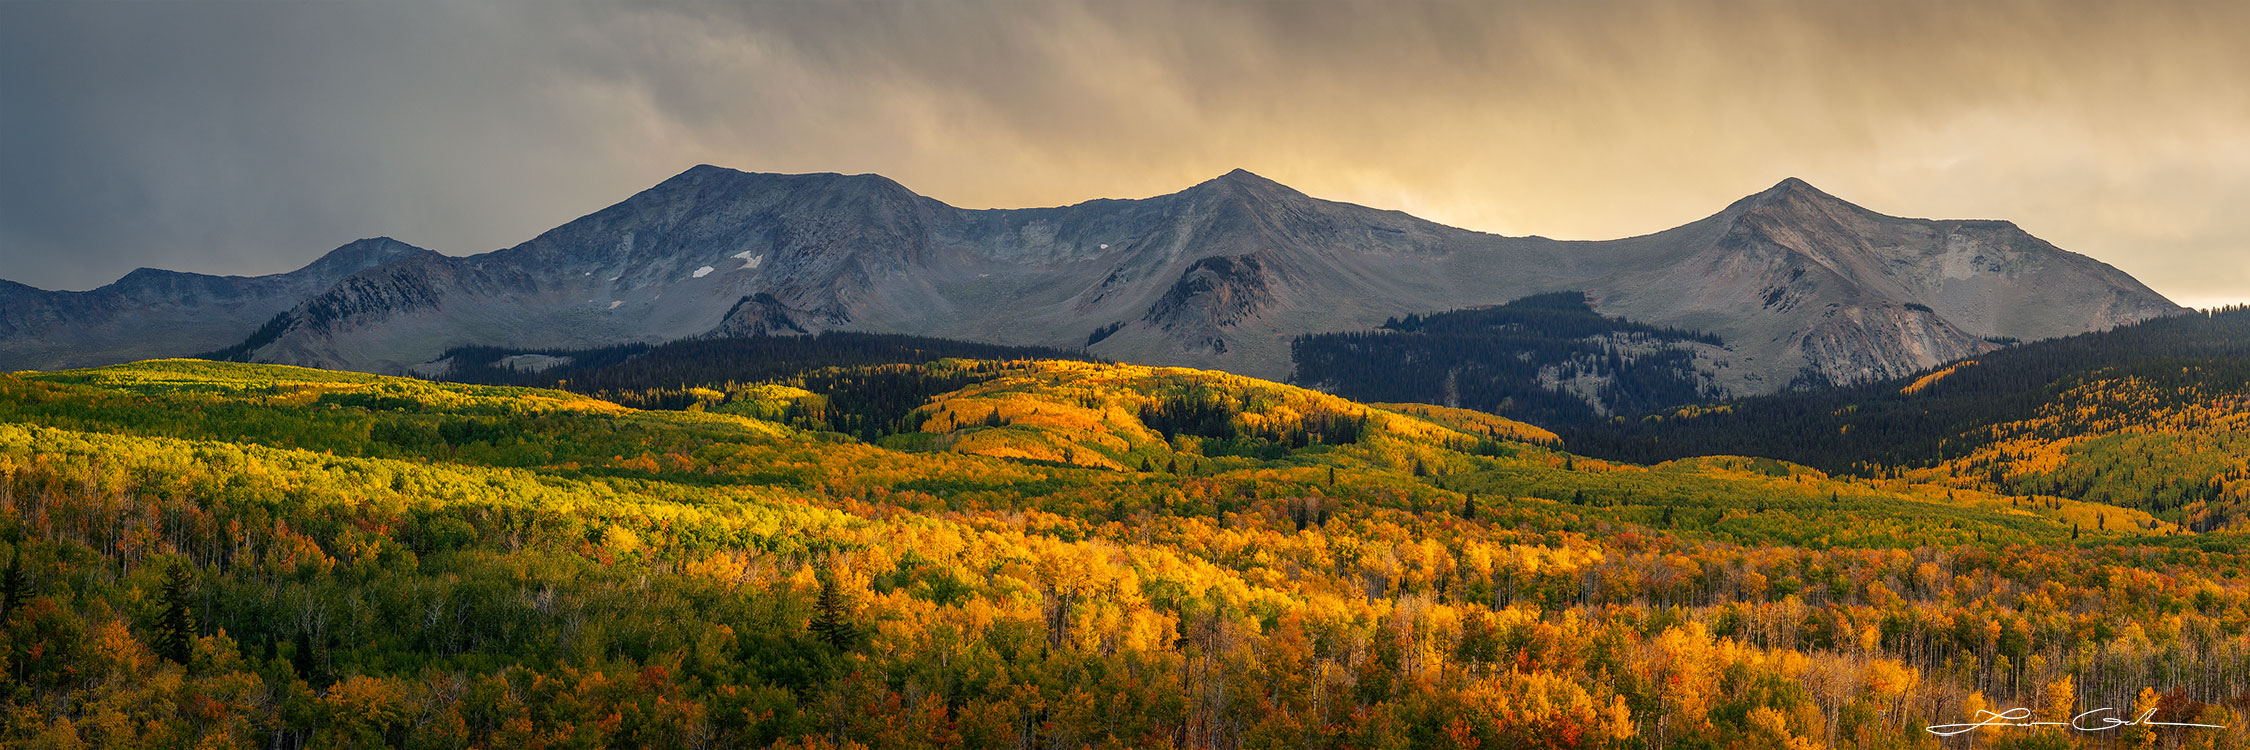 Panoramic view of dramatic light fall colors in a mountain landscape near Kebler Pass, Colorado, showcasing vibrant aspen trees under a golden sunset glow against shaded peaks. - Gintchin Fine Art